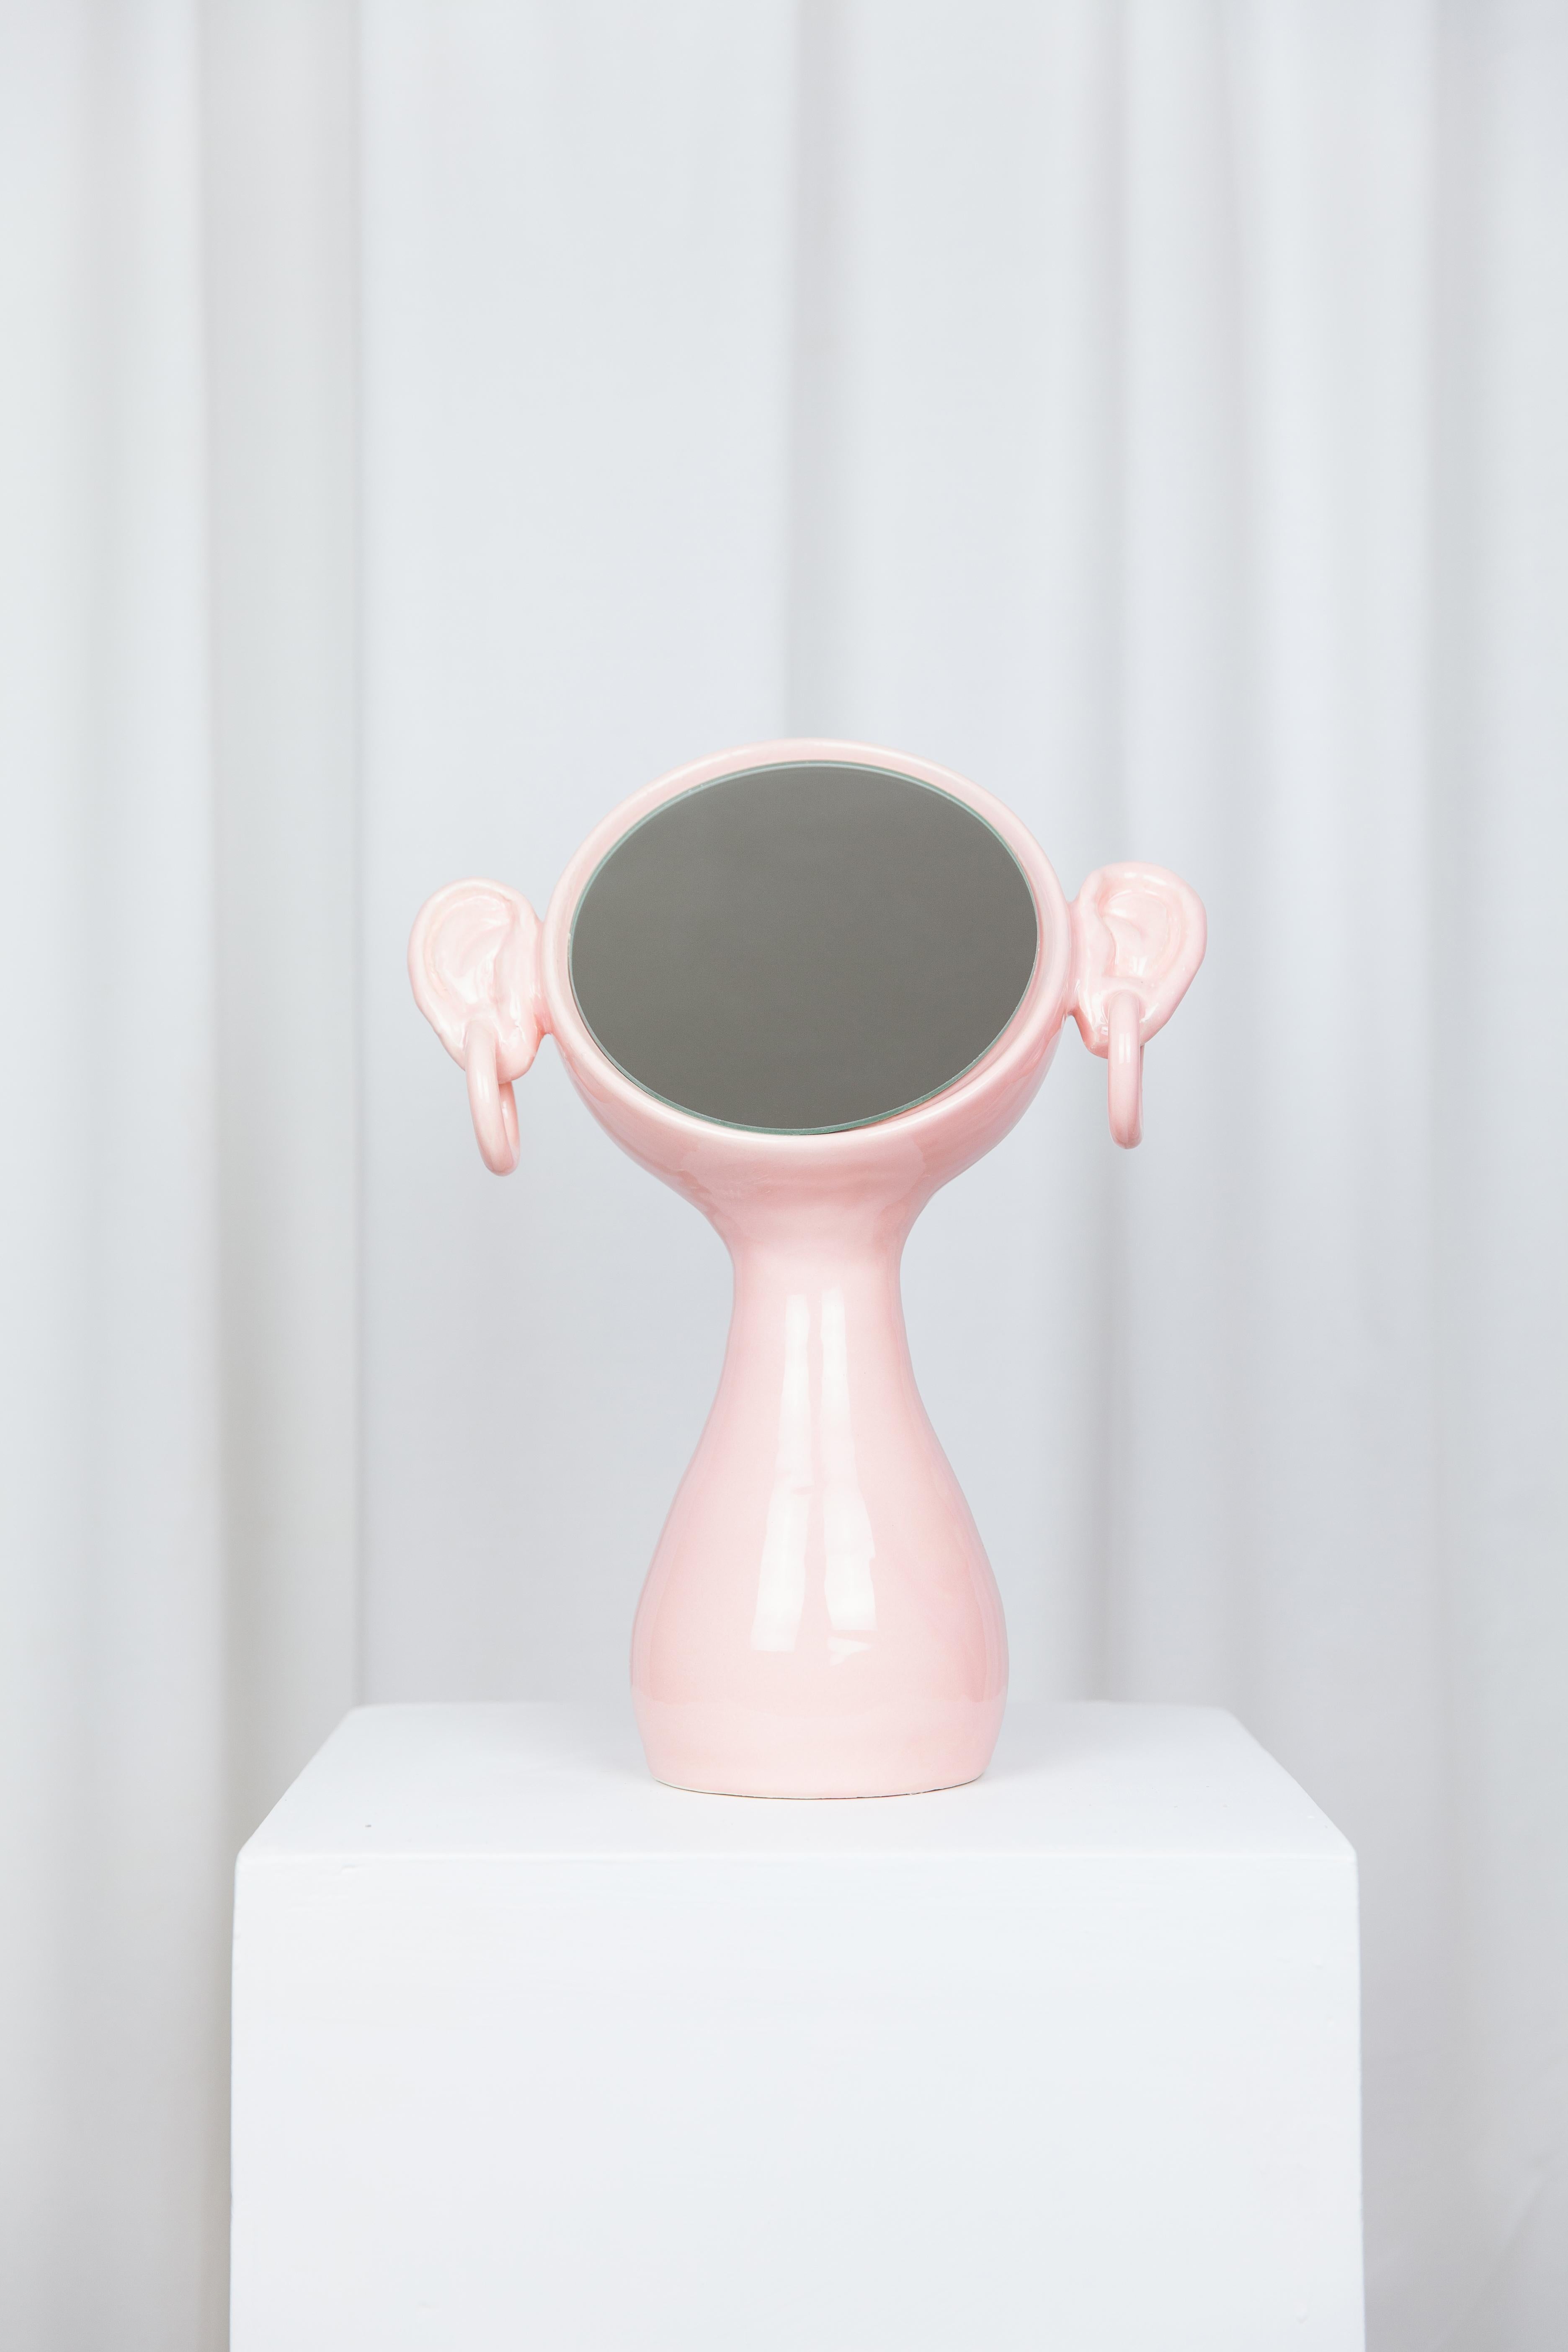 Ears mirror by Lola Mayeras
Dimensions: D 26 x W 12 x W 36 cm
Materials: Earthenware, mirror

Mirror in white earthenware, glazed in pink.
This piece is designed and handcrafted in the south of France.

Lola Mayeras — Designer 
In parallel